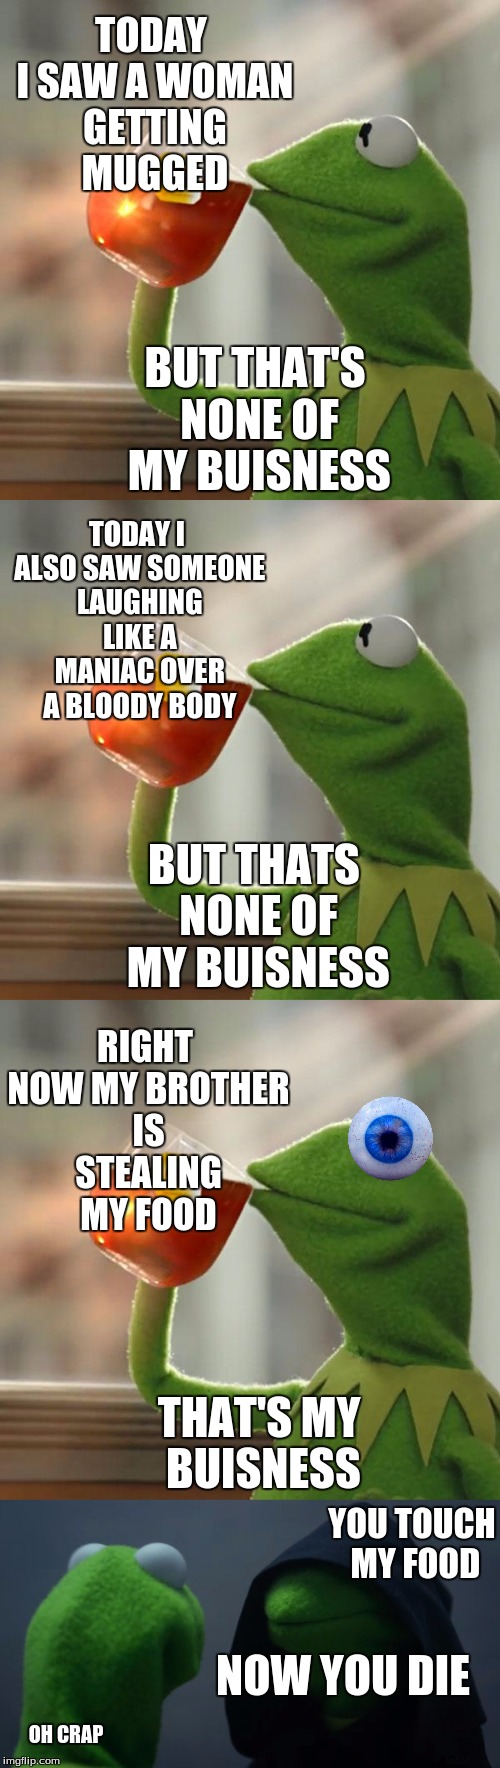 Kermit the not my buisness Frog | TODAY I SAW A WOMAN GETTING MUGGED; BUT THAT'S NONE OF MY BUISNESS; TODAY I ALSO SAW SOMEONE LAUGHING LIKE A MANIAC OVER A BLOODY BODY; BUT THATS NONE OF MY BUISNESS; RIGHT NOW MY BROTHER IS STEALING MY FOOD; THAT'S MY BUISNESS; YOU TOUCH MY FOOD; NOW YOU DIE; OH CRAP | image tagged in kermit the frog,evil kermit,kermit,kermit triggered | made w/ Imgflip meme maker